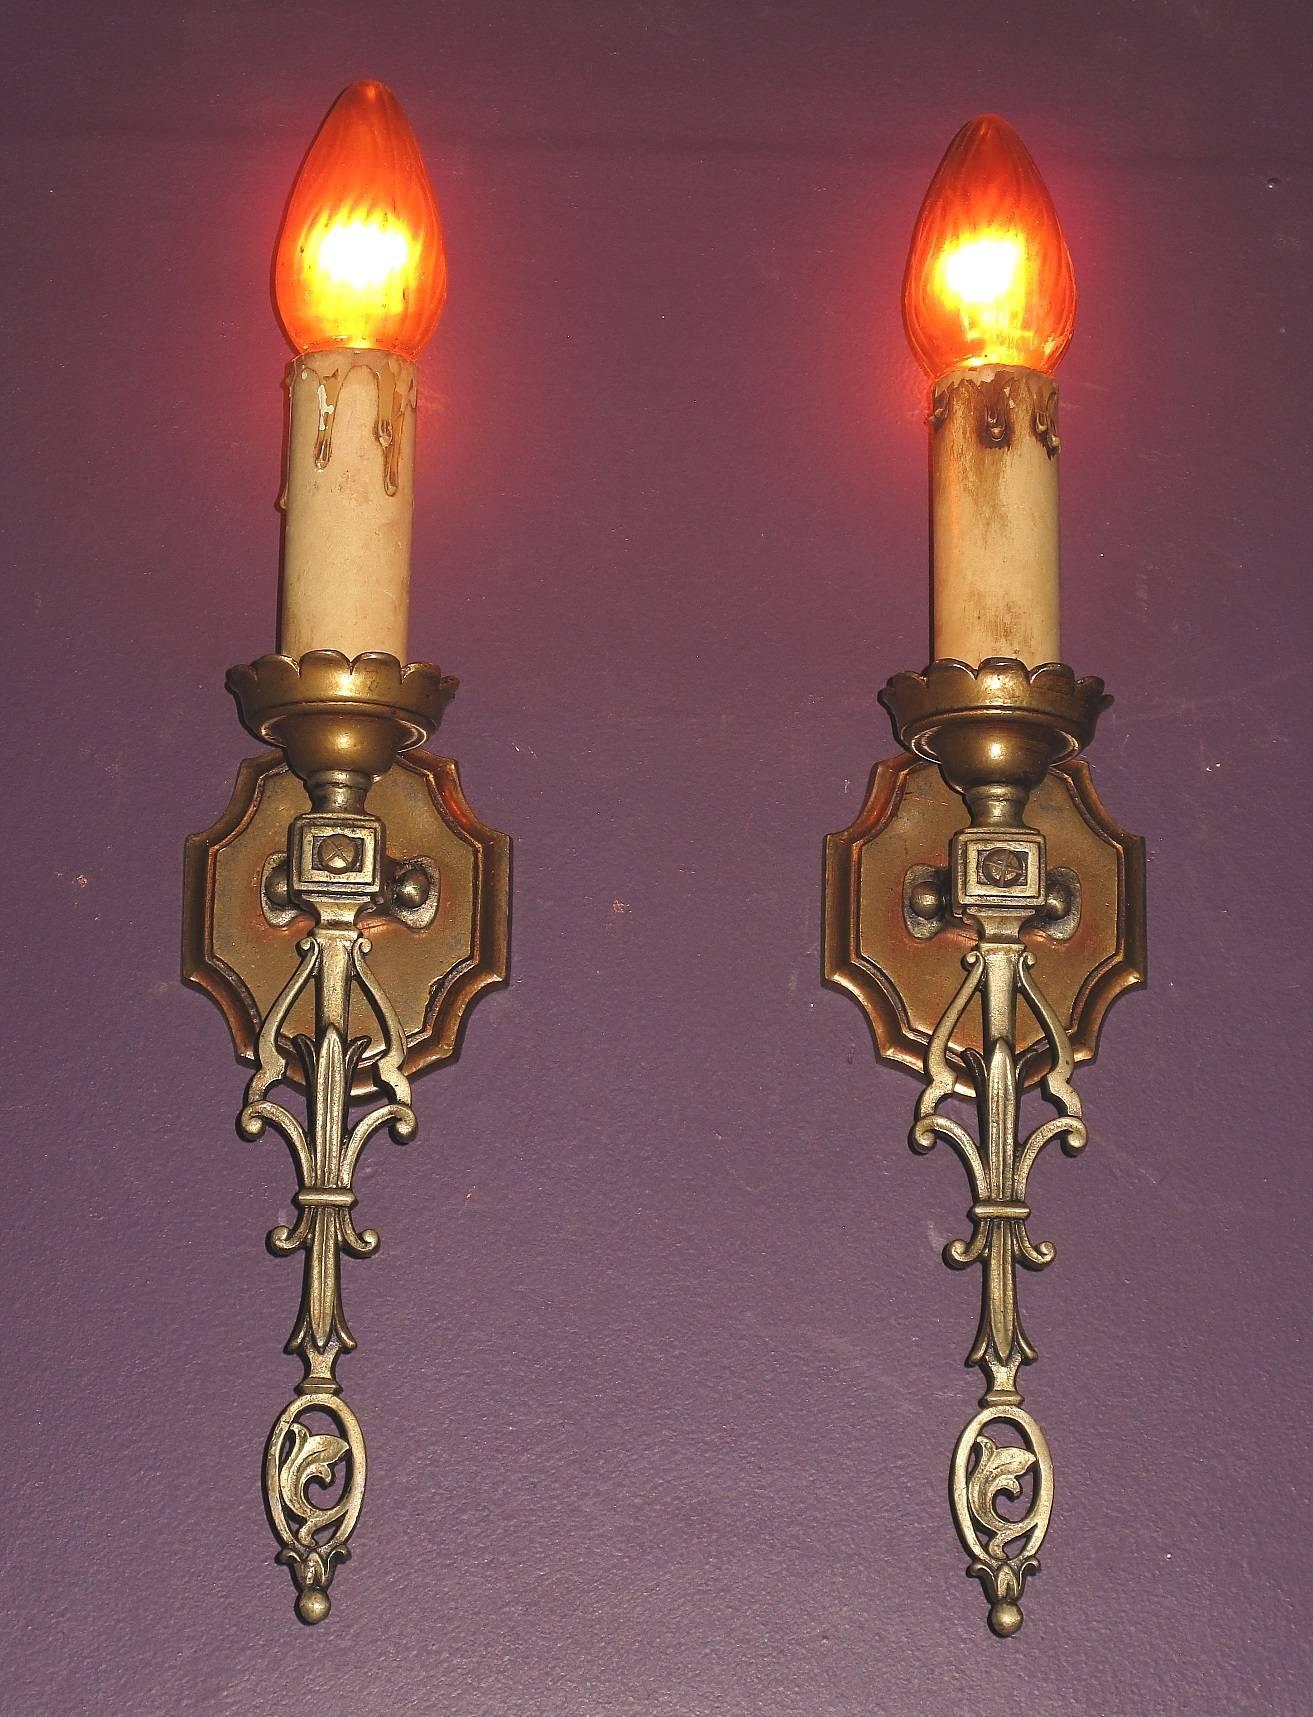 American French Eclectic Style Single Bulb Sconces, 1920s For Sale